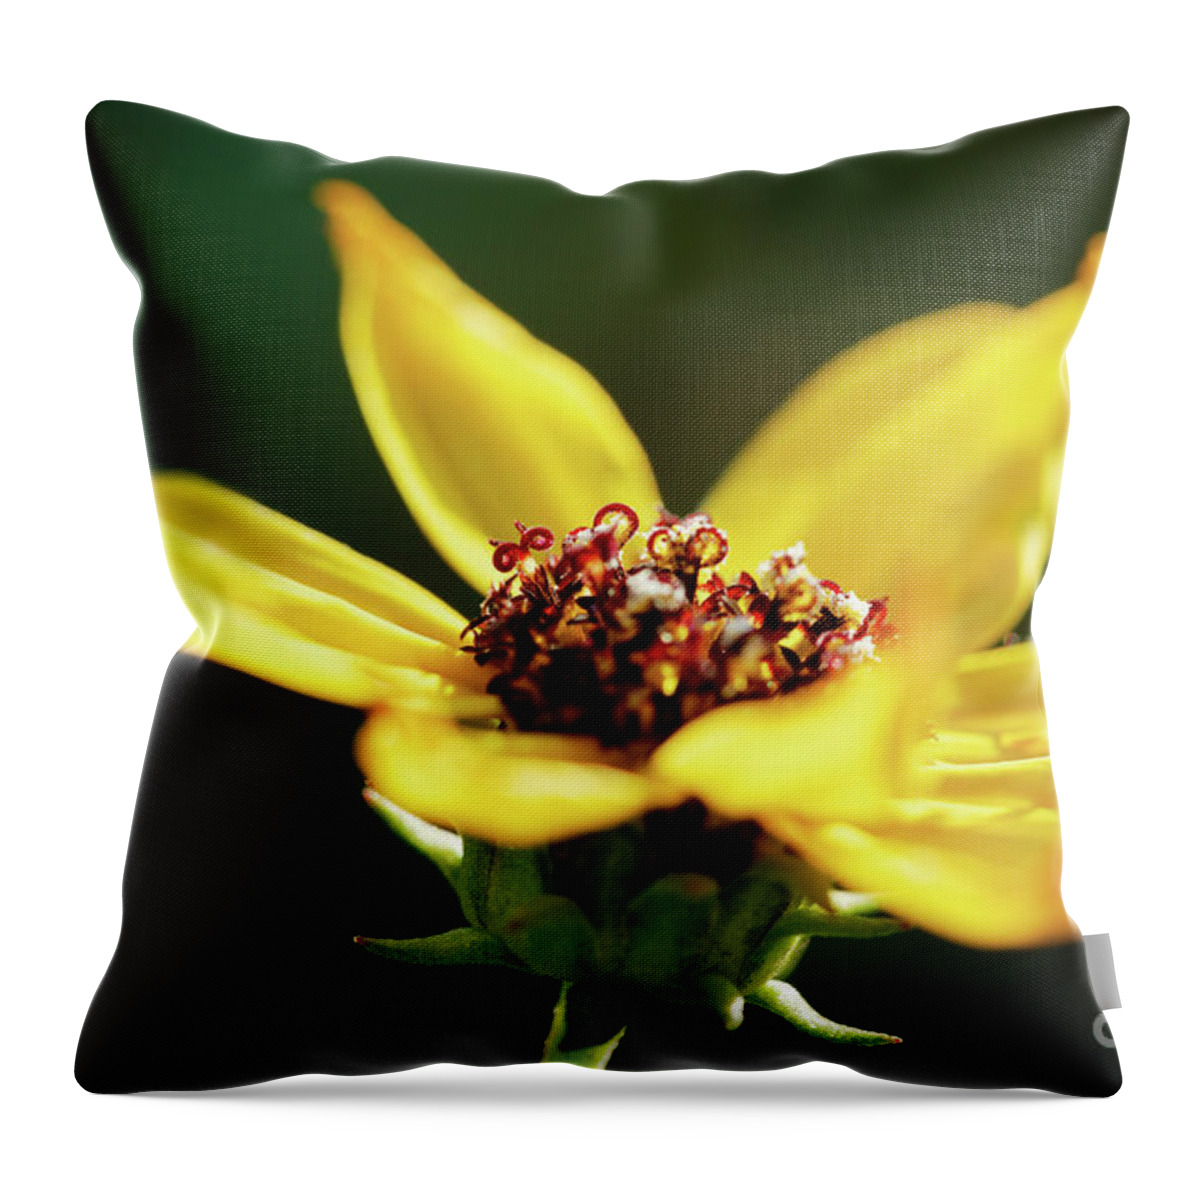 Green Throw Pillow featuring the photograph Happiness Is Yellow by Marvin Spates